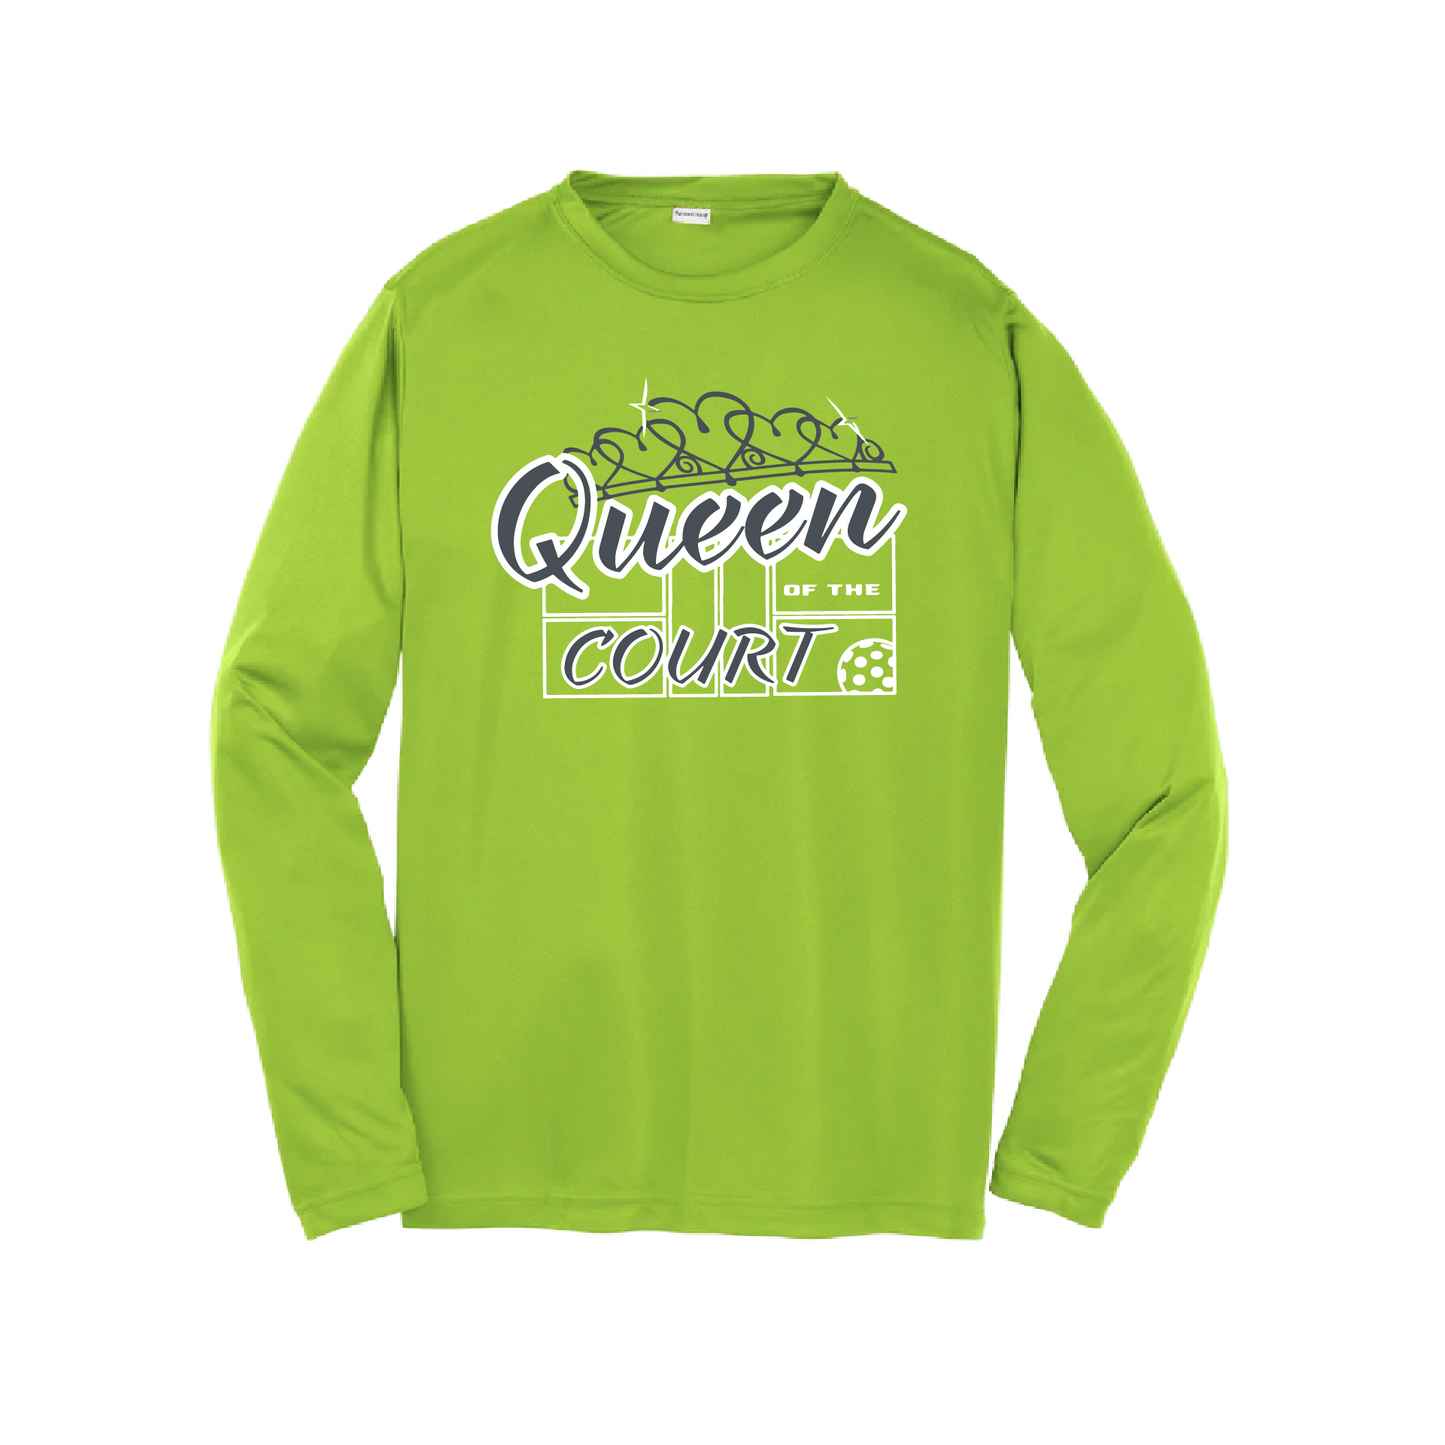 Pickleball Design: Queen of the Court  Youth Style: Long Sleeve  Shirts are lightweight, roomy and highly breathable. These moisture-wicking shirts are designed for athletic performance. They feature PosiCharge technology to lock in color and prevent logos from fading. Removable tag and set-in sleeves for comfort.